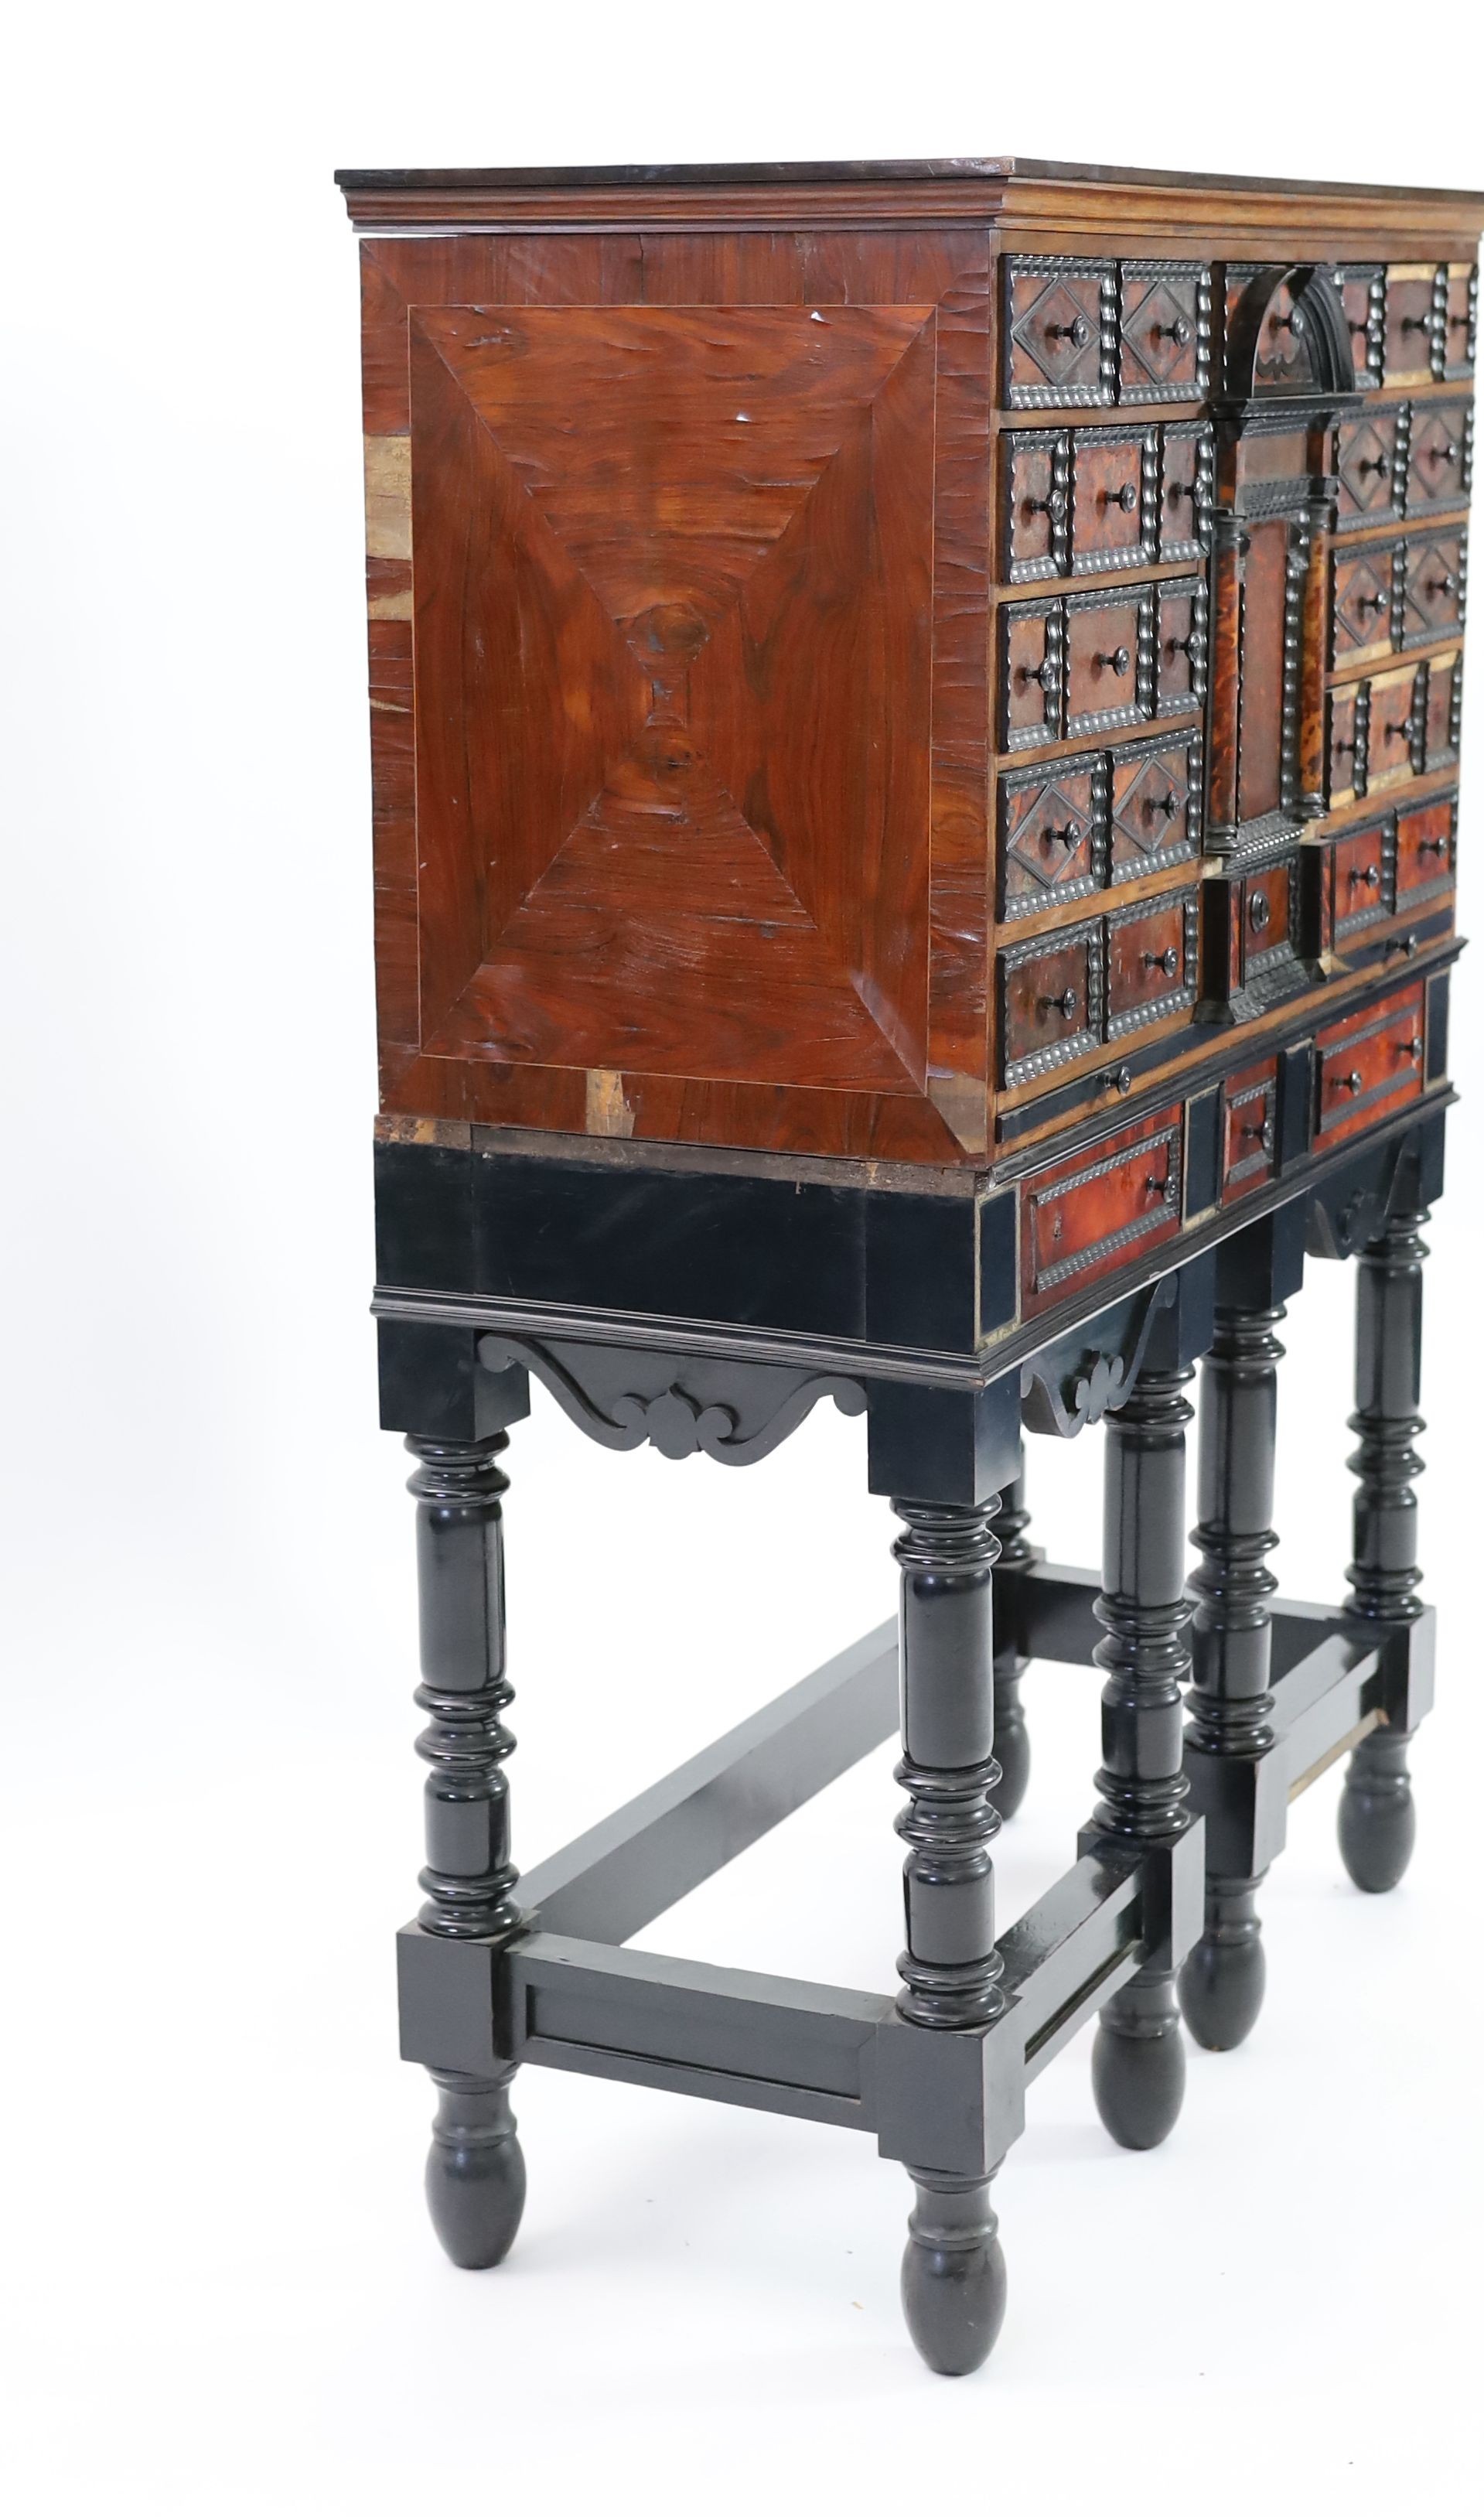 A 17th century Flemish style ebony and tortoiseshell cabinet on stand, width 99cm depth 42cm height 131cm